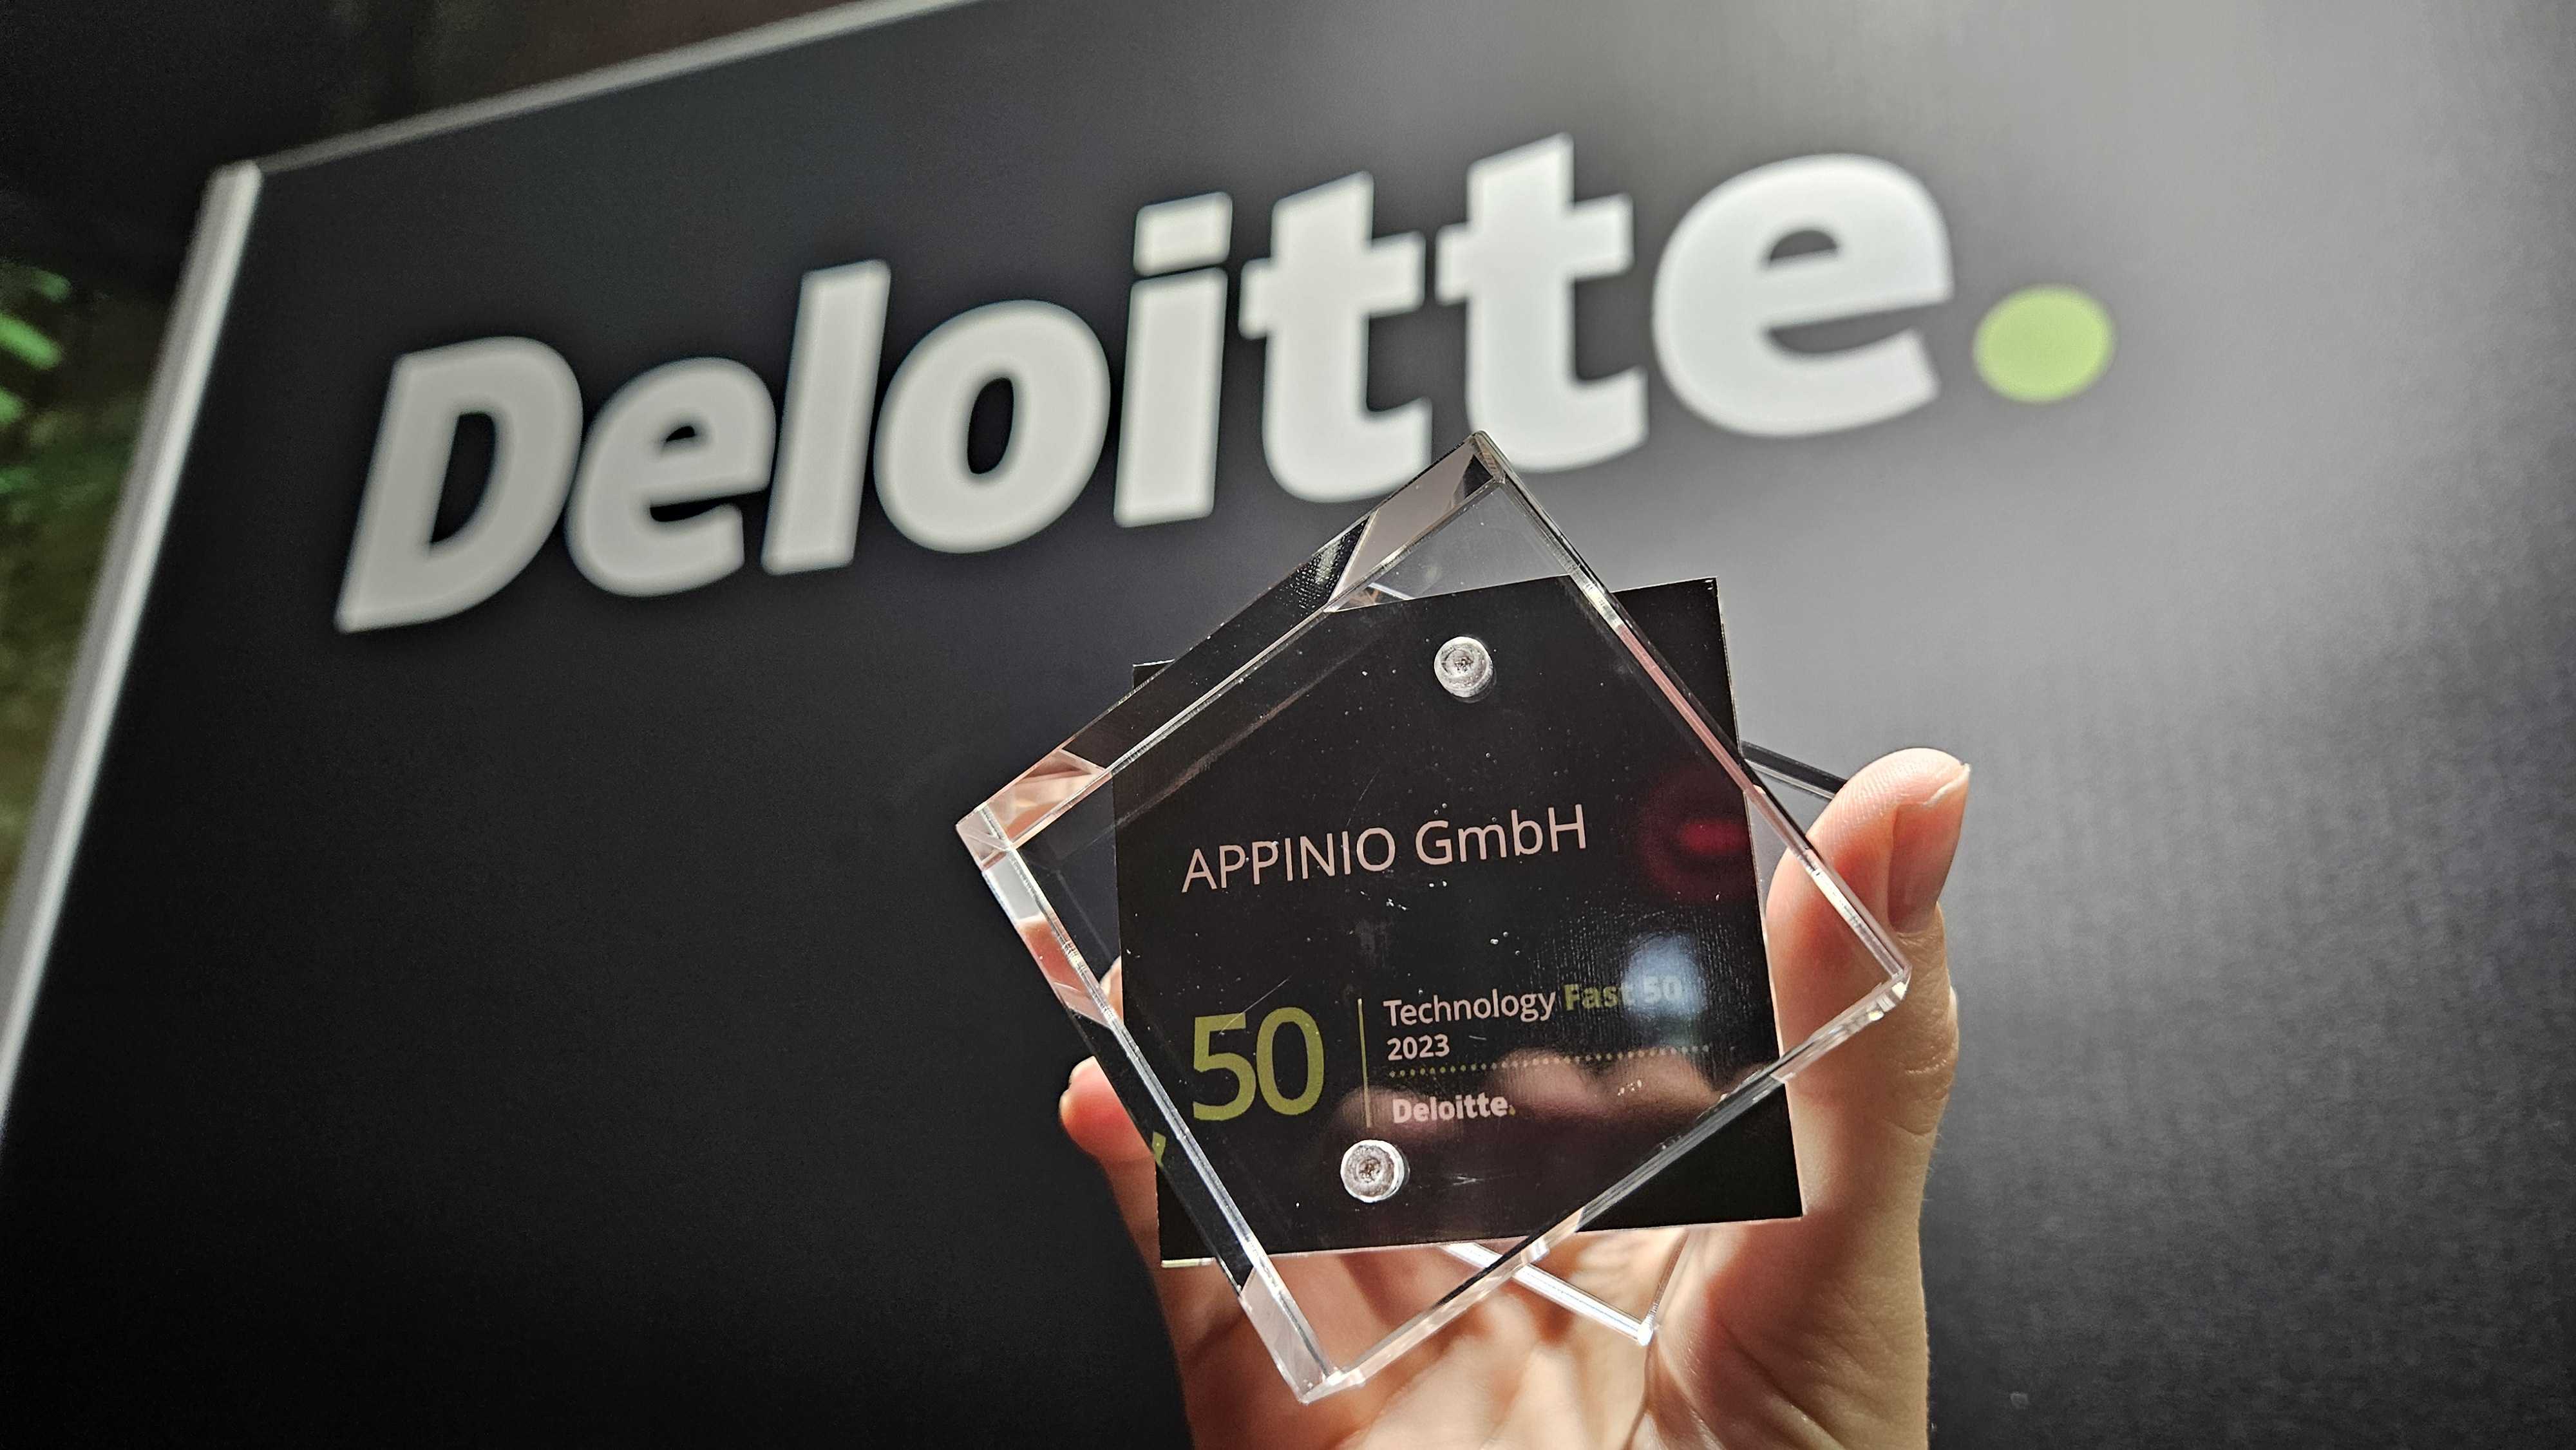 The global market research platform Appinio was awarded the German Deloitte Technology Fast 50 Award last week and was once again included in the FT1000 ranking of the fastest-growing companies in Europe in the Financial Times.